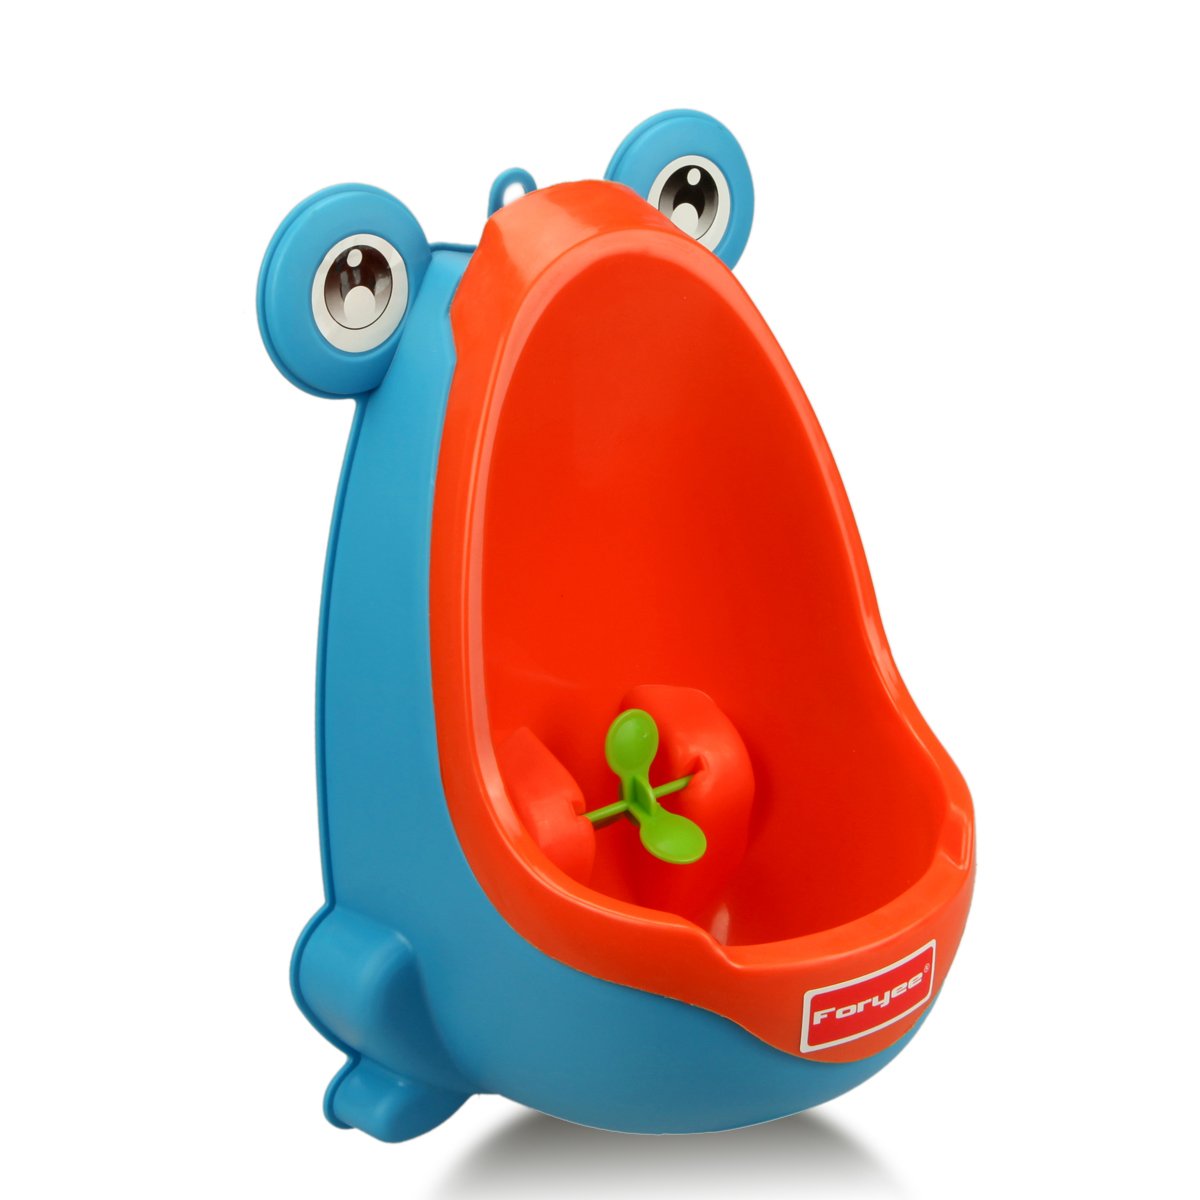 Frog Potty Training Urinal with Aiming Target